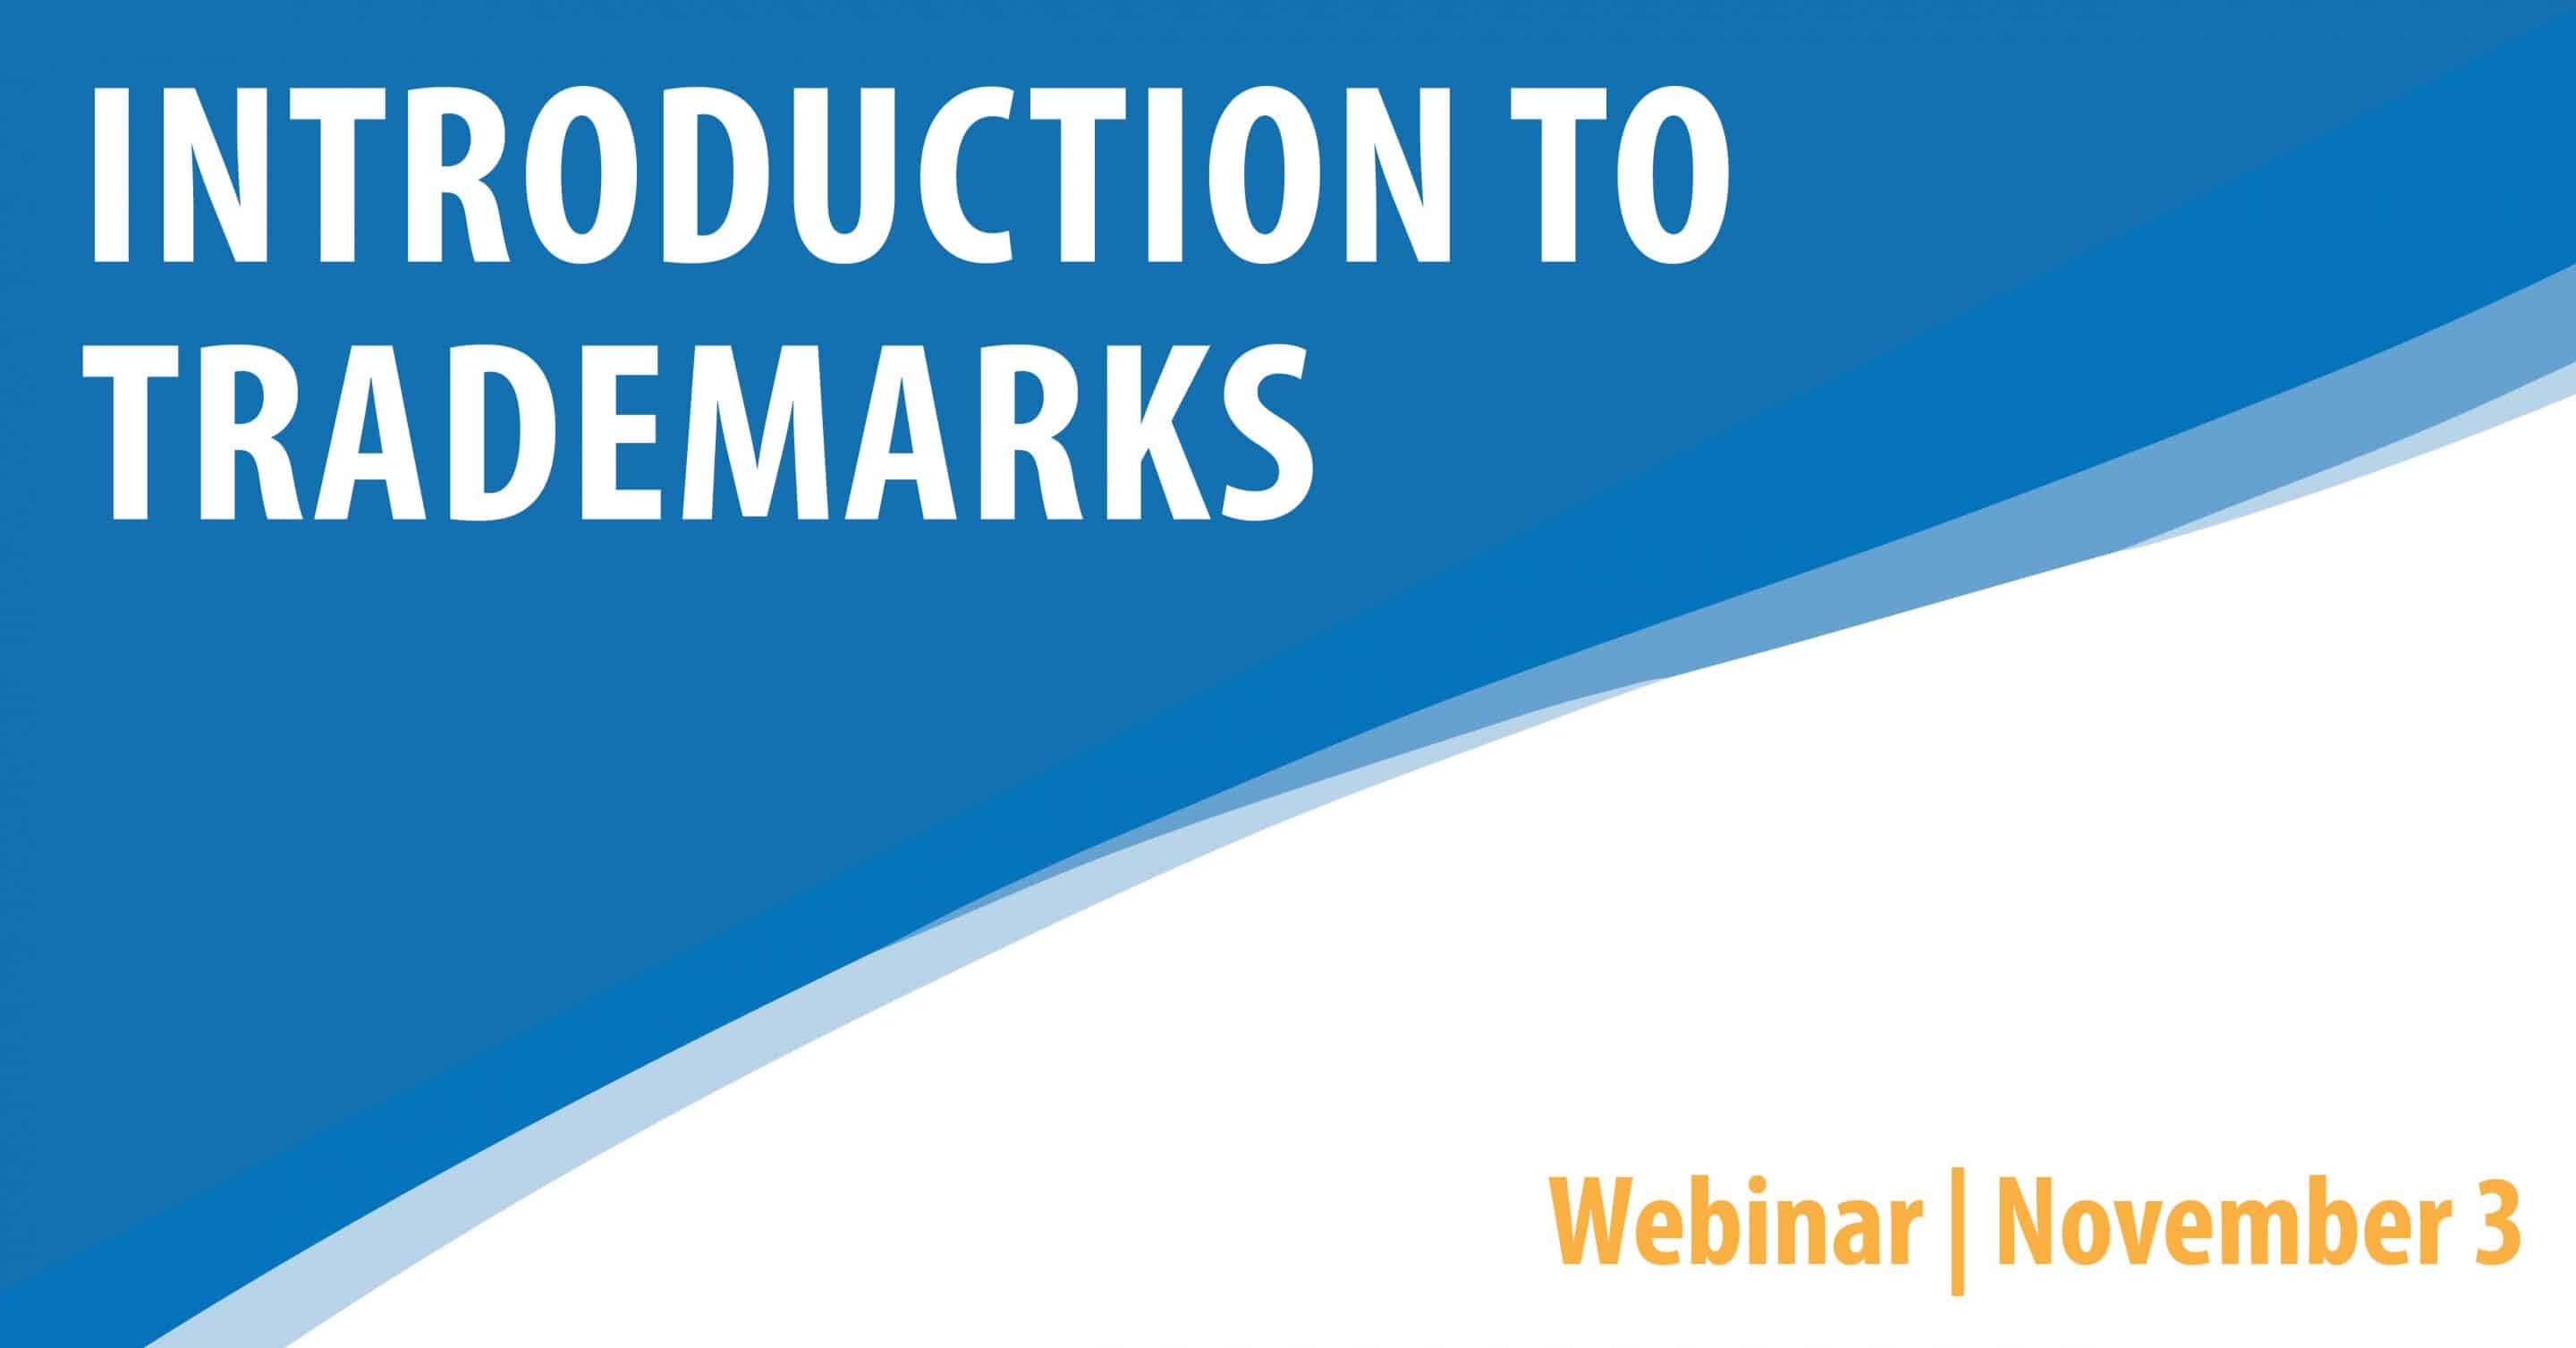 Introduction To Trademarks